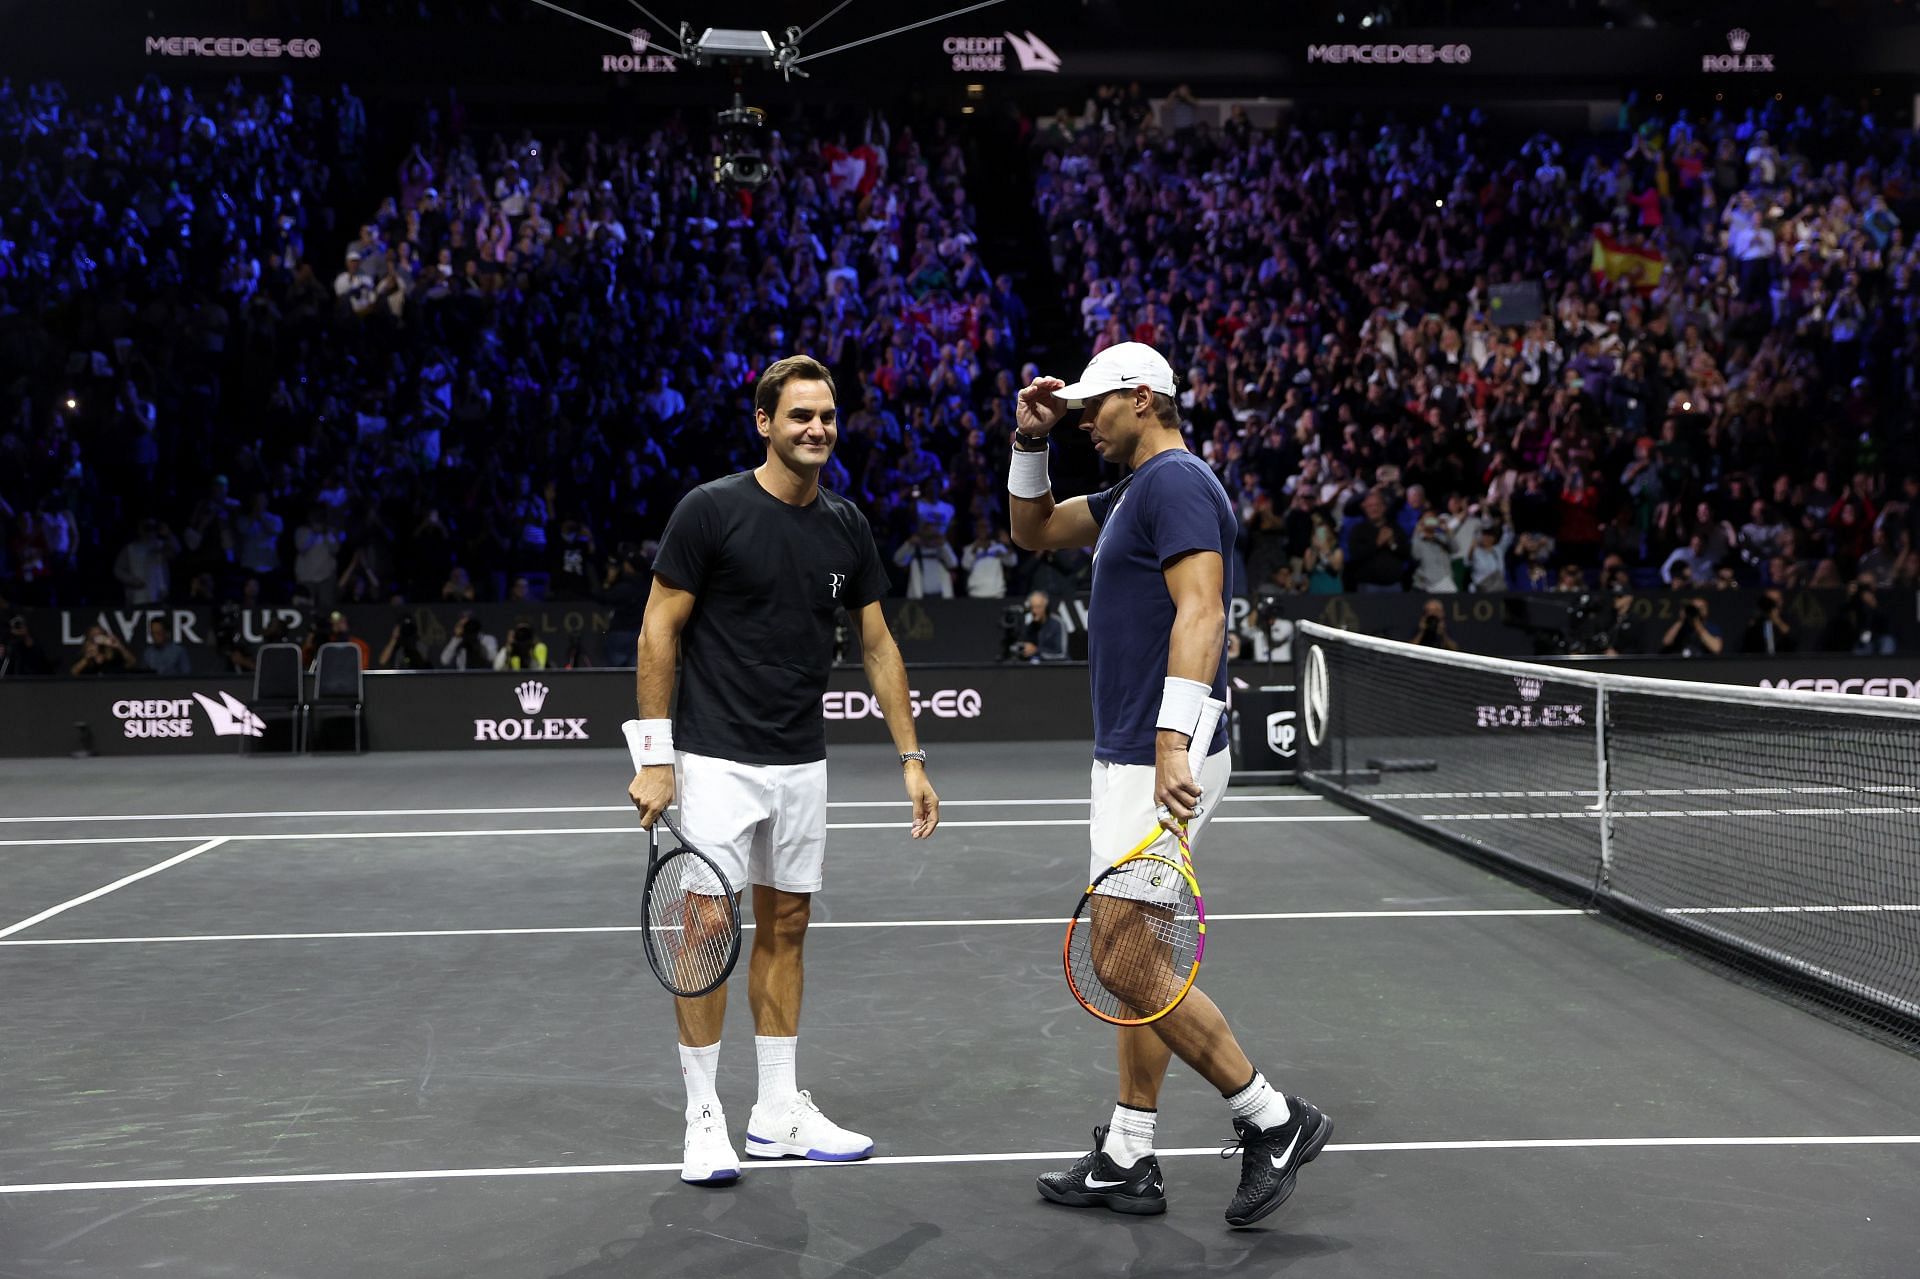 Roger Federer (left) and Nadal ahead of their Laver Cup 2022 match